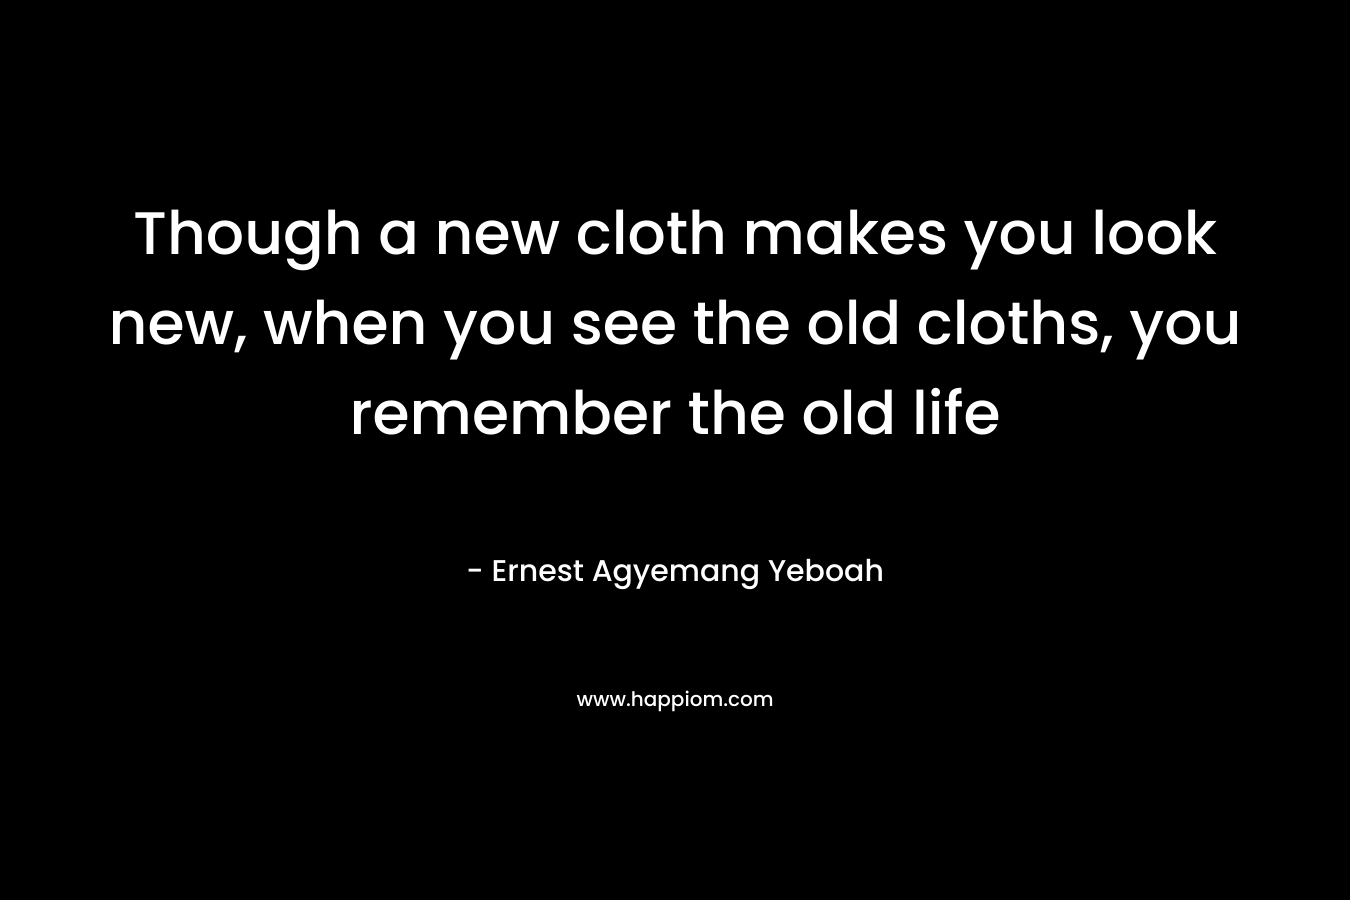 Though a new cloth makes you look new, when you see the old cloths, you remember the old life – Ernest Agyemang Yeboah